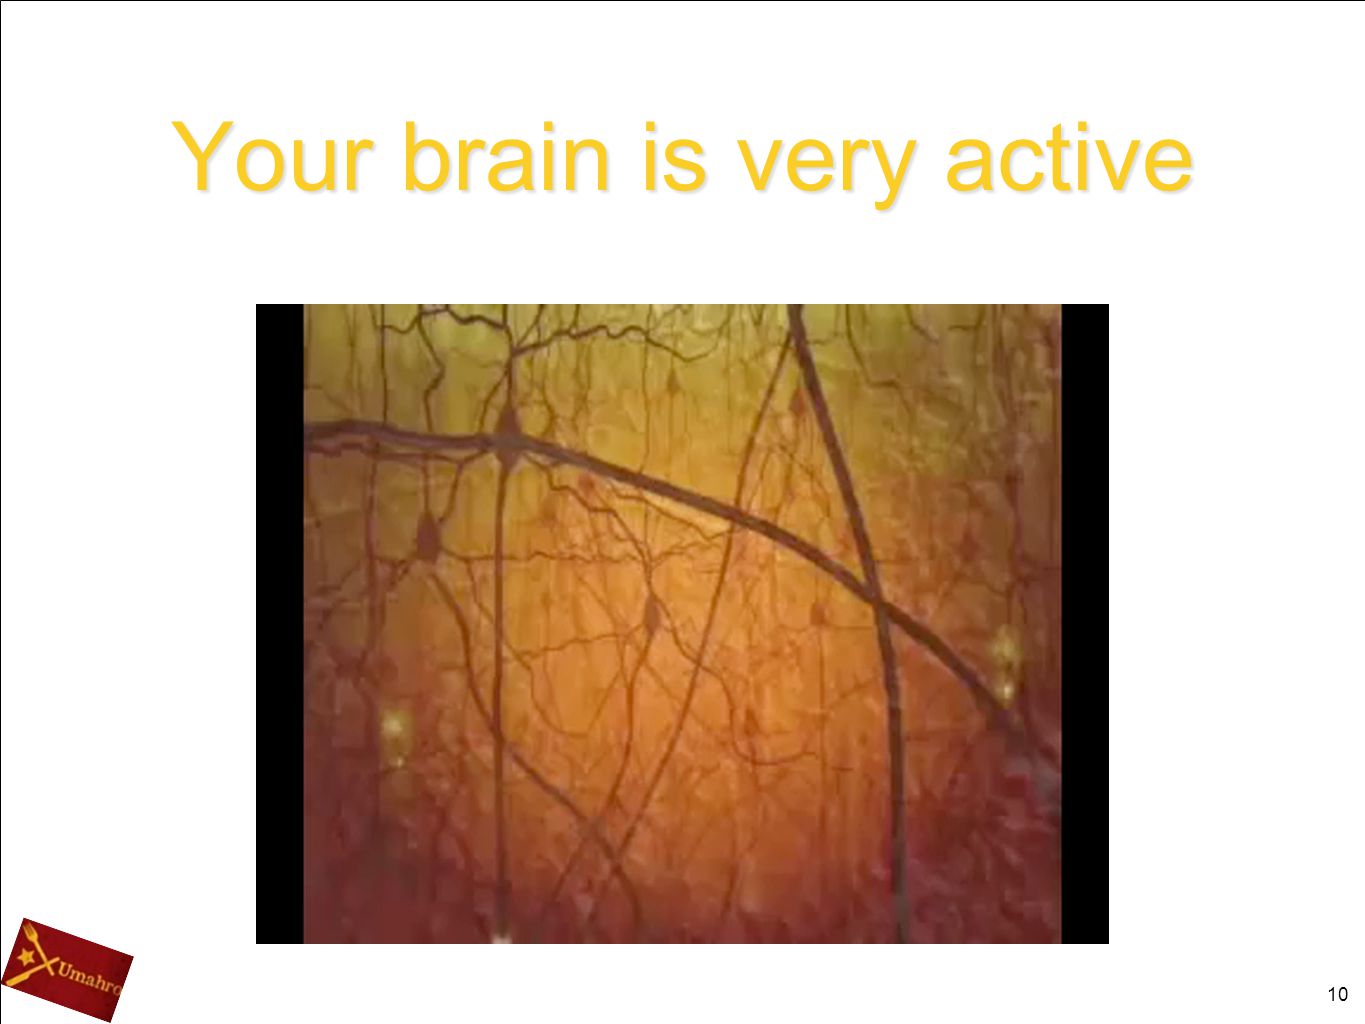 Your brain is very active